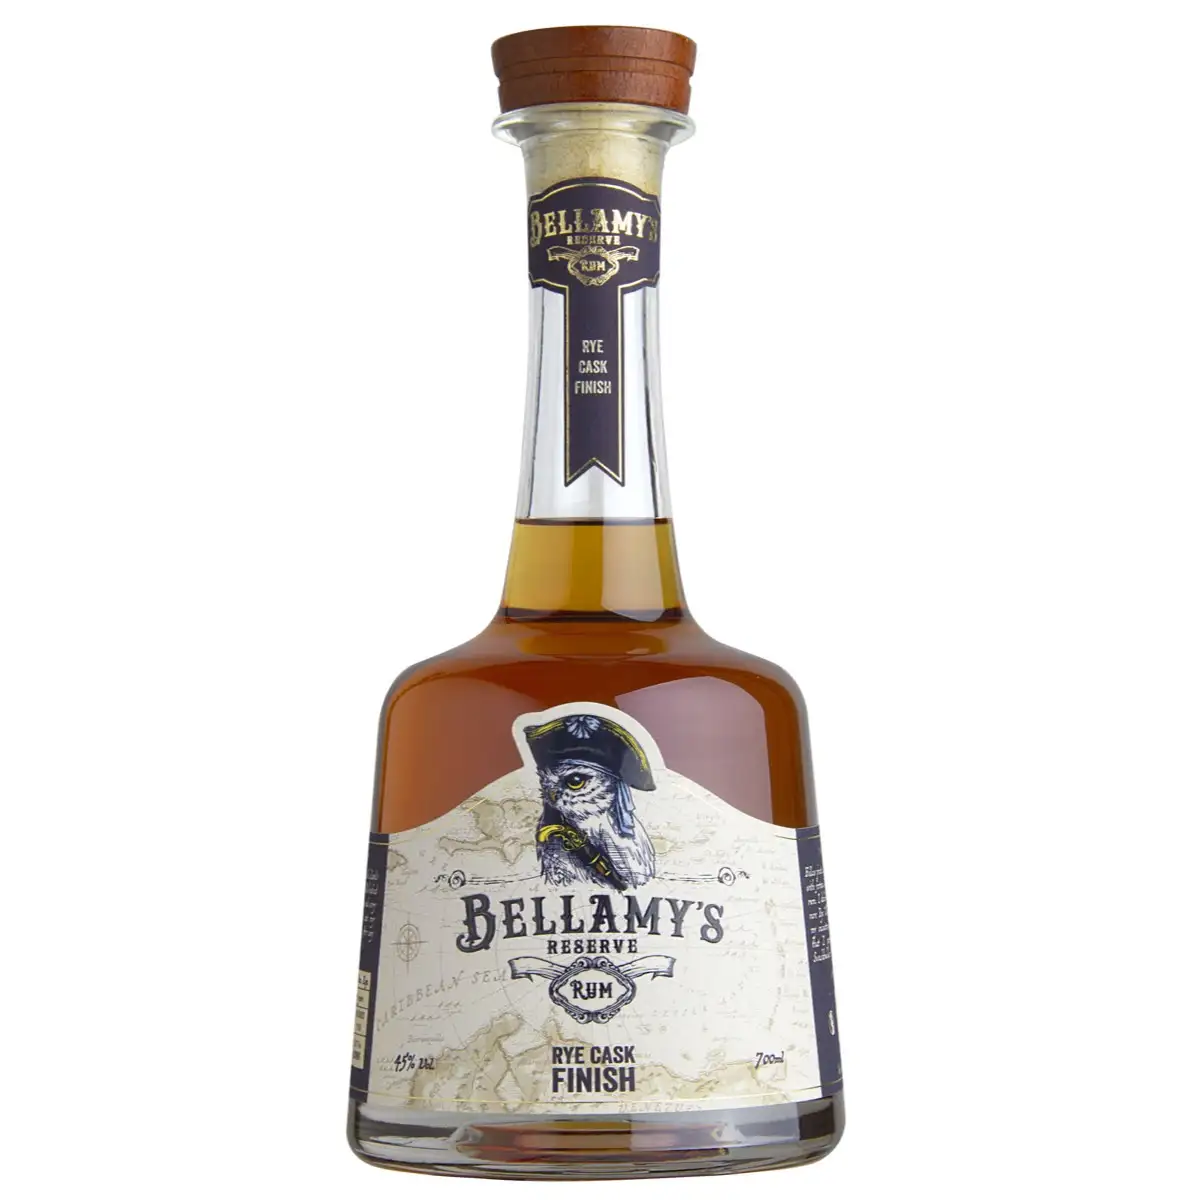 Image of the front of the bottle of the rum Bellamy‘s Reserve Rum Rye Cask Finish